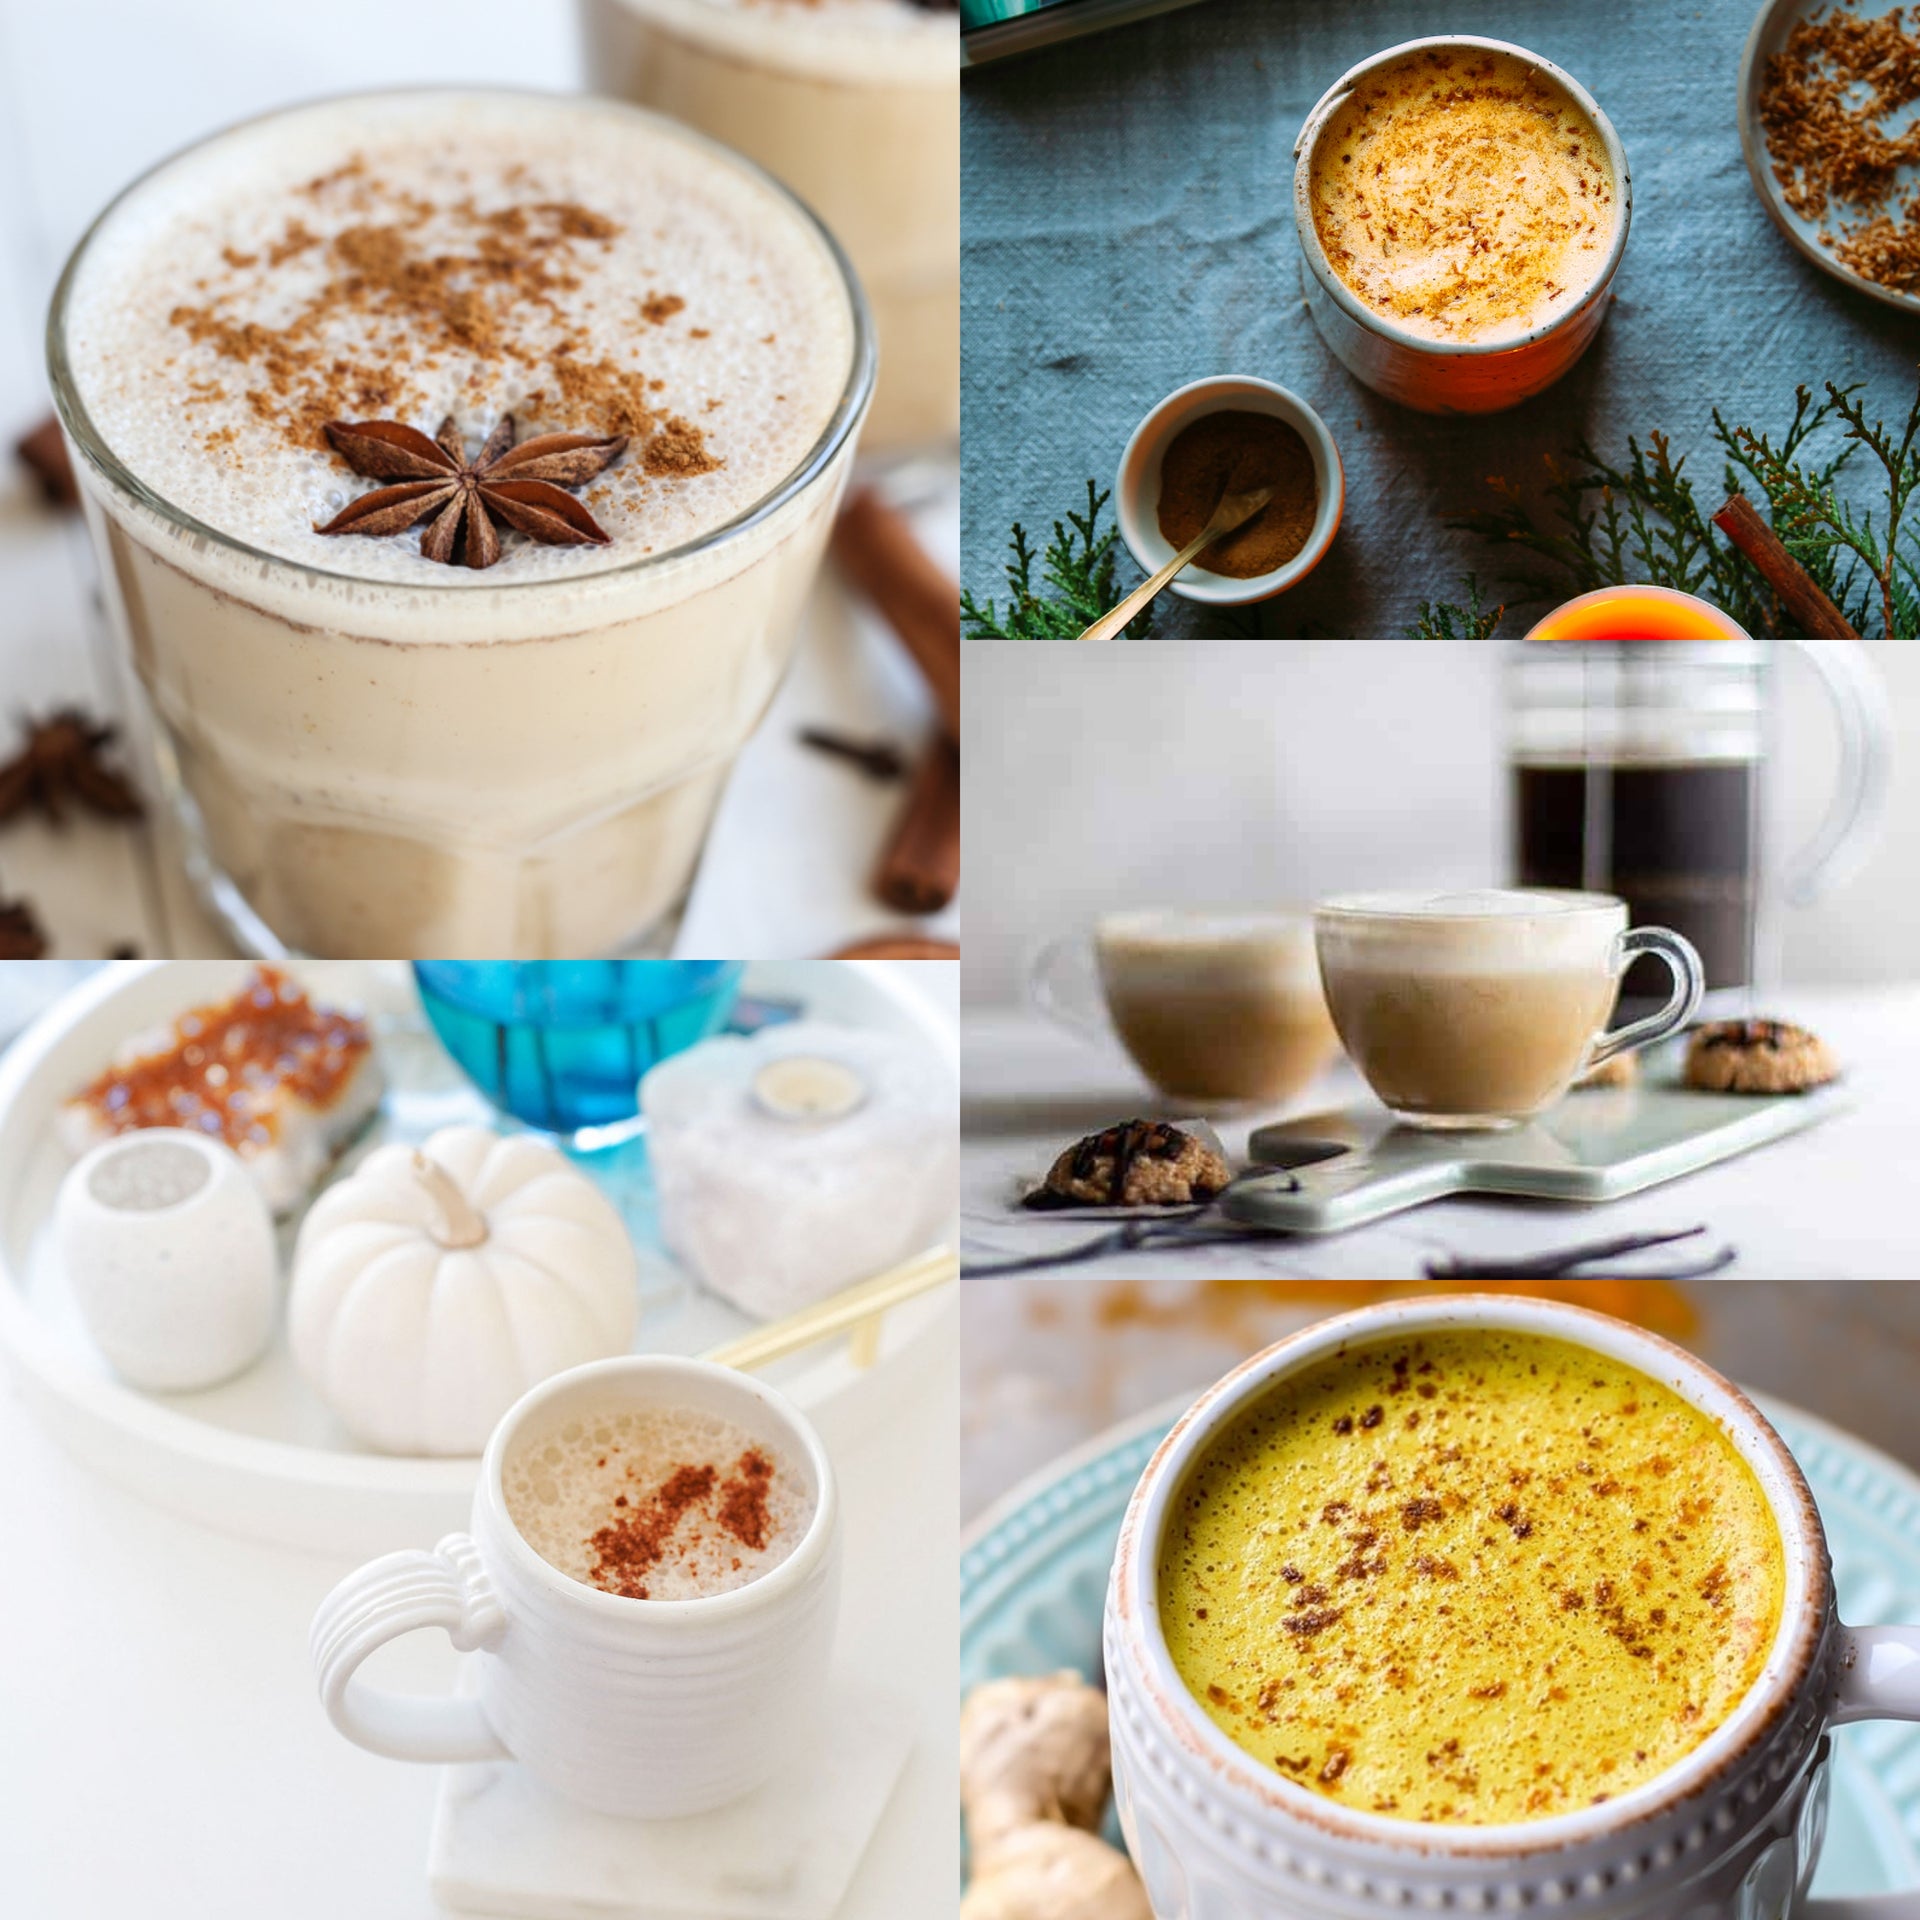 5 Healthy Plant-Based Latte Recipes for a Cozy Fall